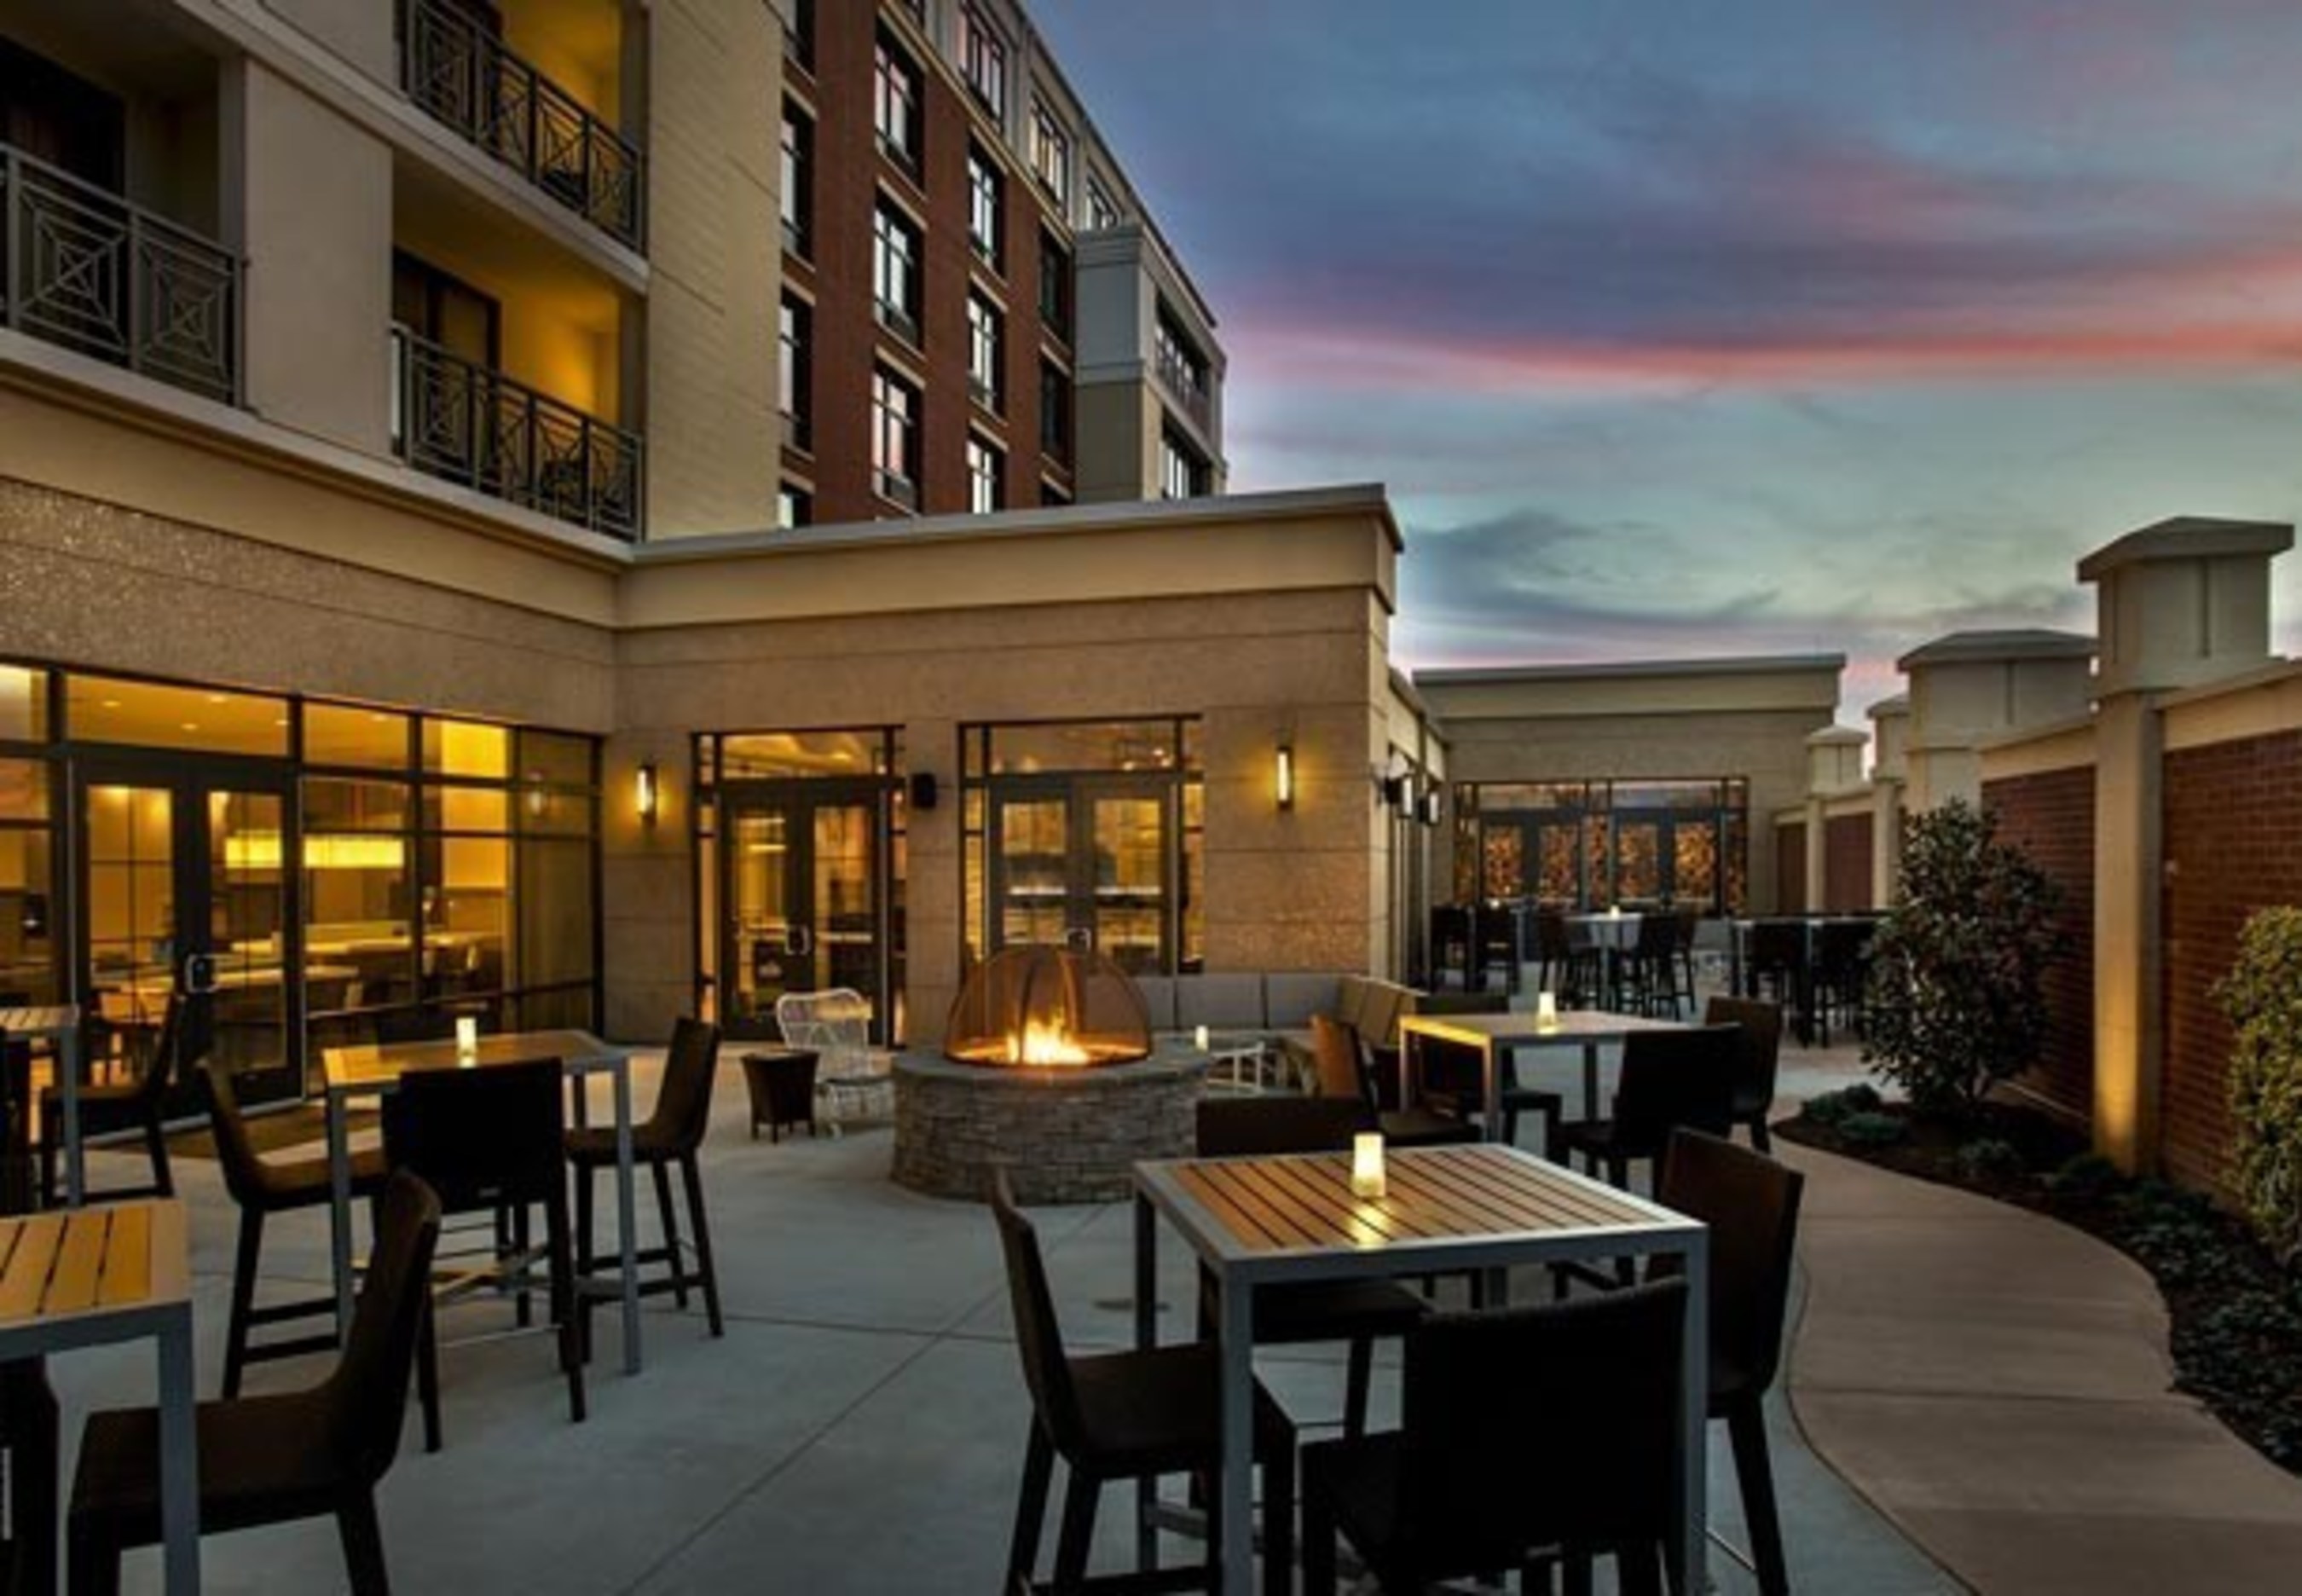 Courtyard Philadelphia Lansdale will be holding an official opening event the evening of Wednesday, Dec. 3, 2014, from 5:30 pm to 7:30 pm to celebrate one of the newest Montgomery, PA hotels. For information, www.courtyard.com/PHLLD  or call 1-215-412-8686.